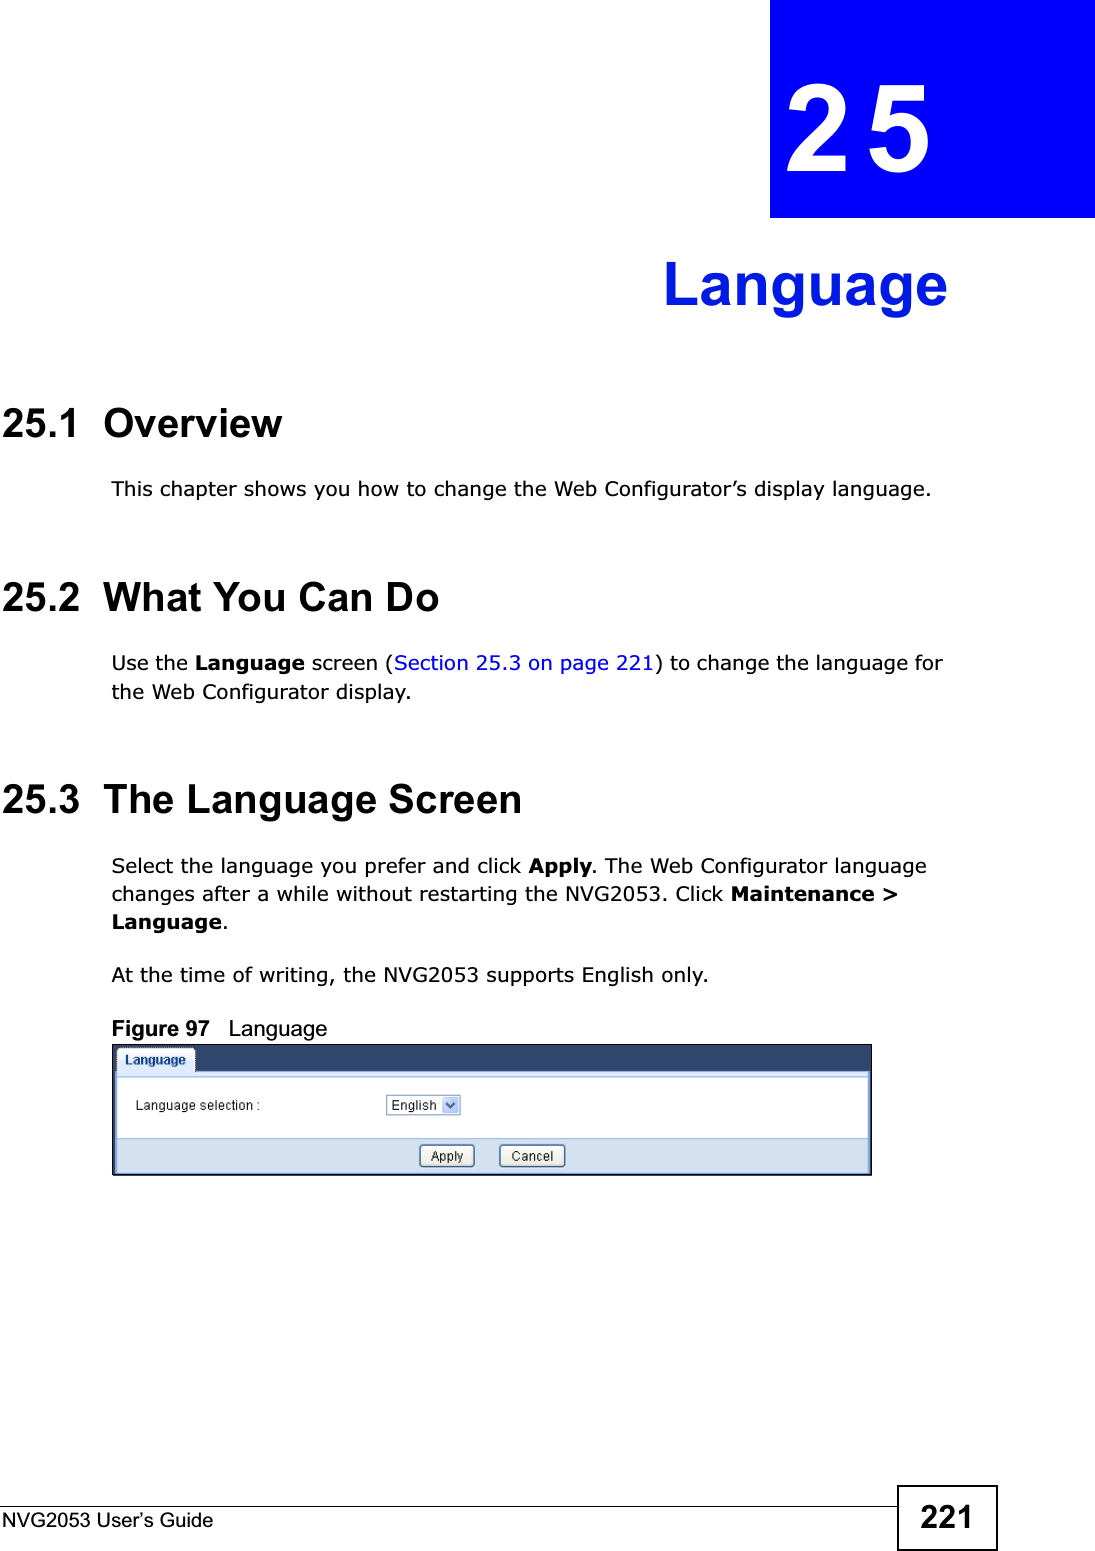 NVG2053 User’s Guide 221CHAPTER 25Language25.1  OverviewThis chapter shows you how to change the Web Configurator’s display language.25.2  What You Can DoUse the Language screen (Section 25.3 on page 221) to change the language for the Web Configurator display.25.3  The Language ScreenSelect the language you prefer and click Apply. The Web Configurator language changes after a while without restarting the NVG2053. Click Maintenance &gt; Language.At the time of writing, the NVG2053 supports English only.Figure 97   Language